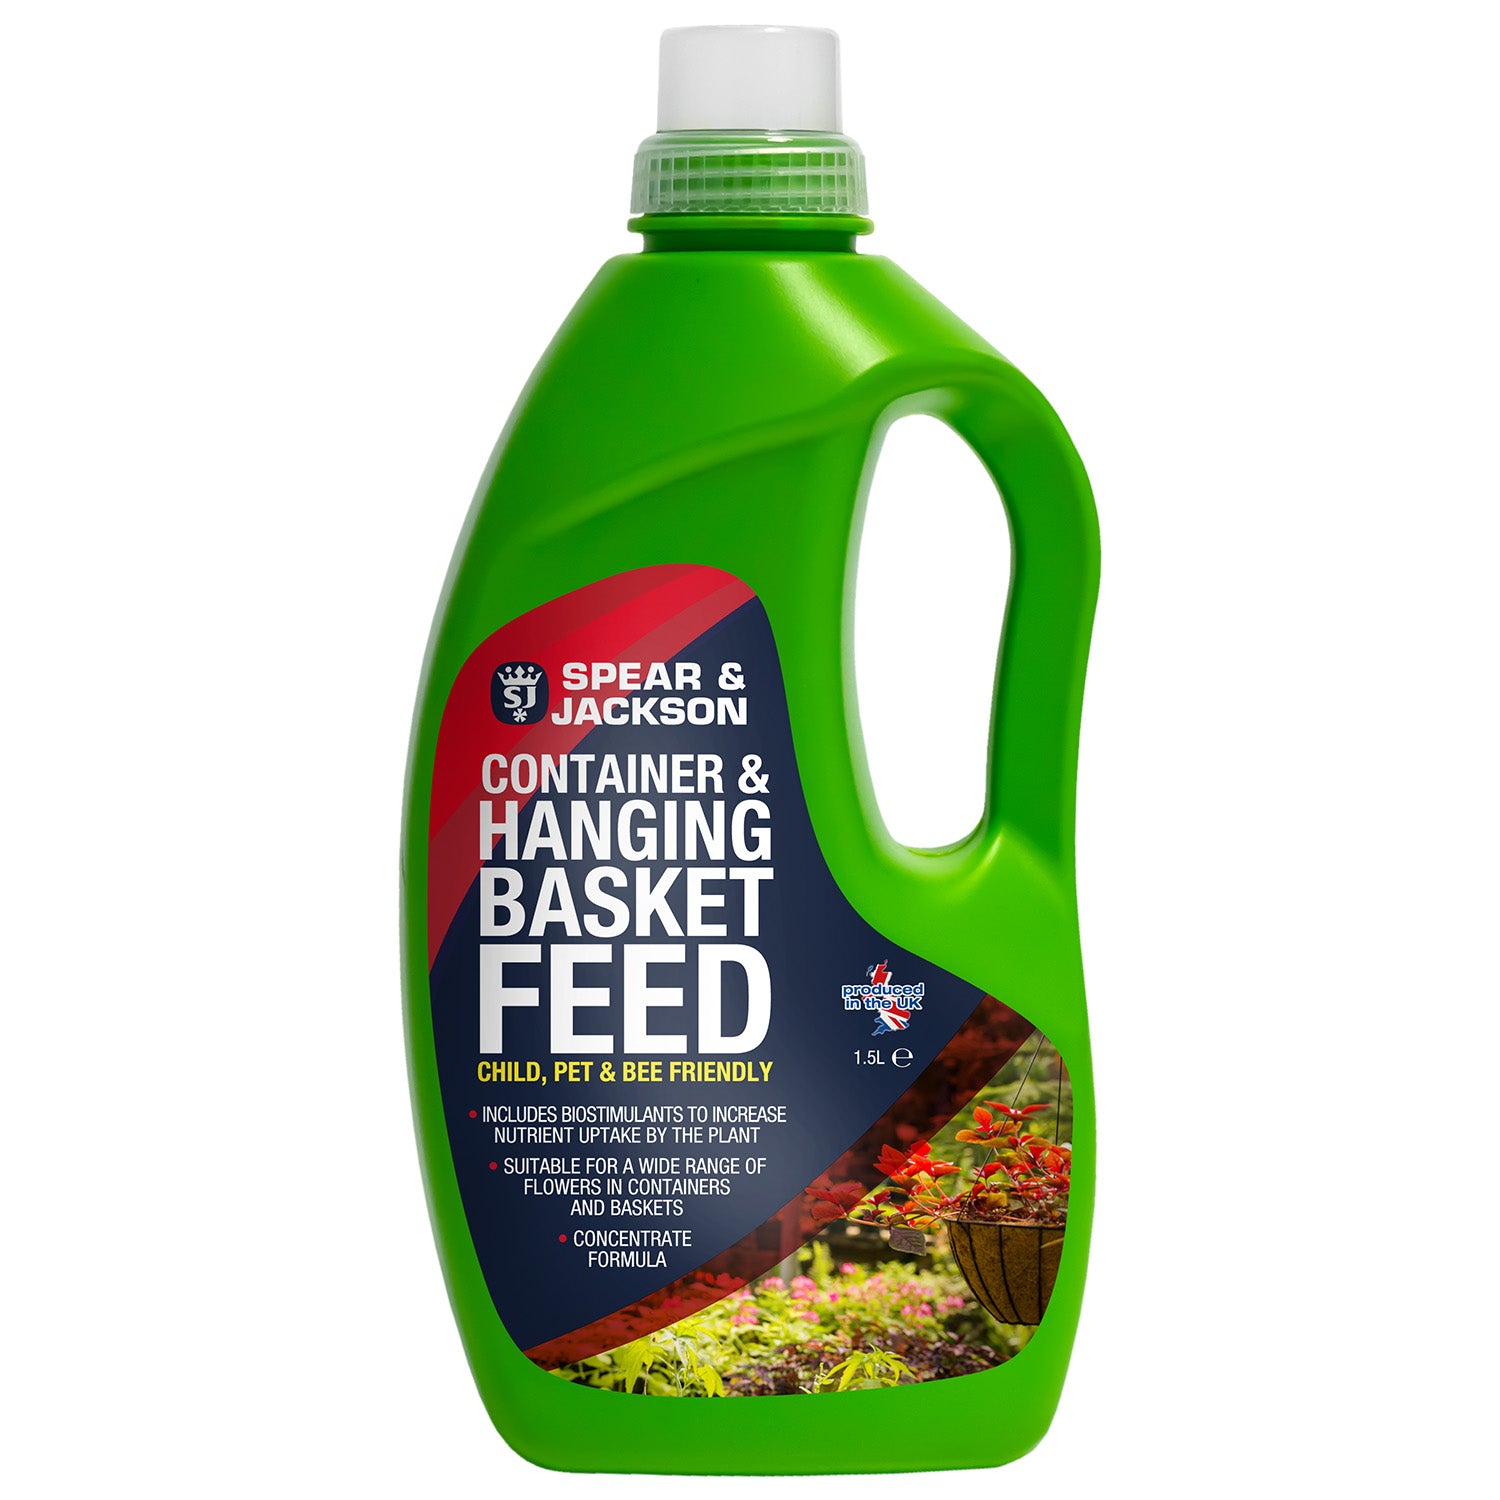 S&J Organic Liquid Container & Hanging Basket Feed Concentrate 1.5L